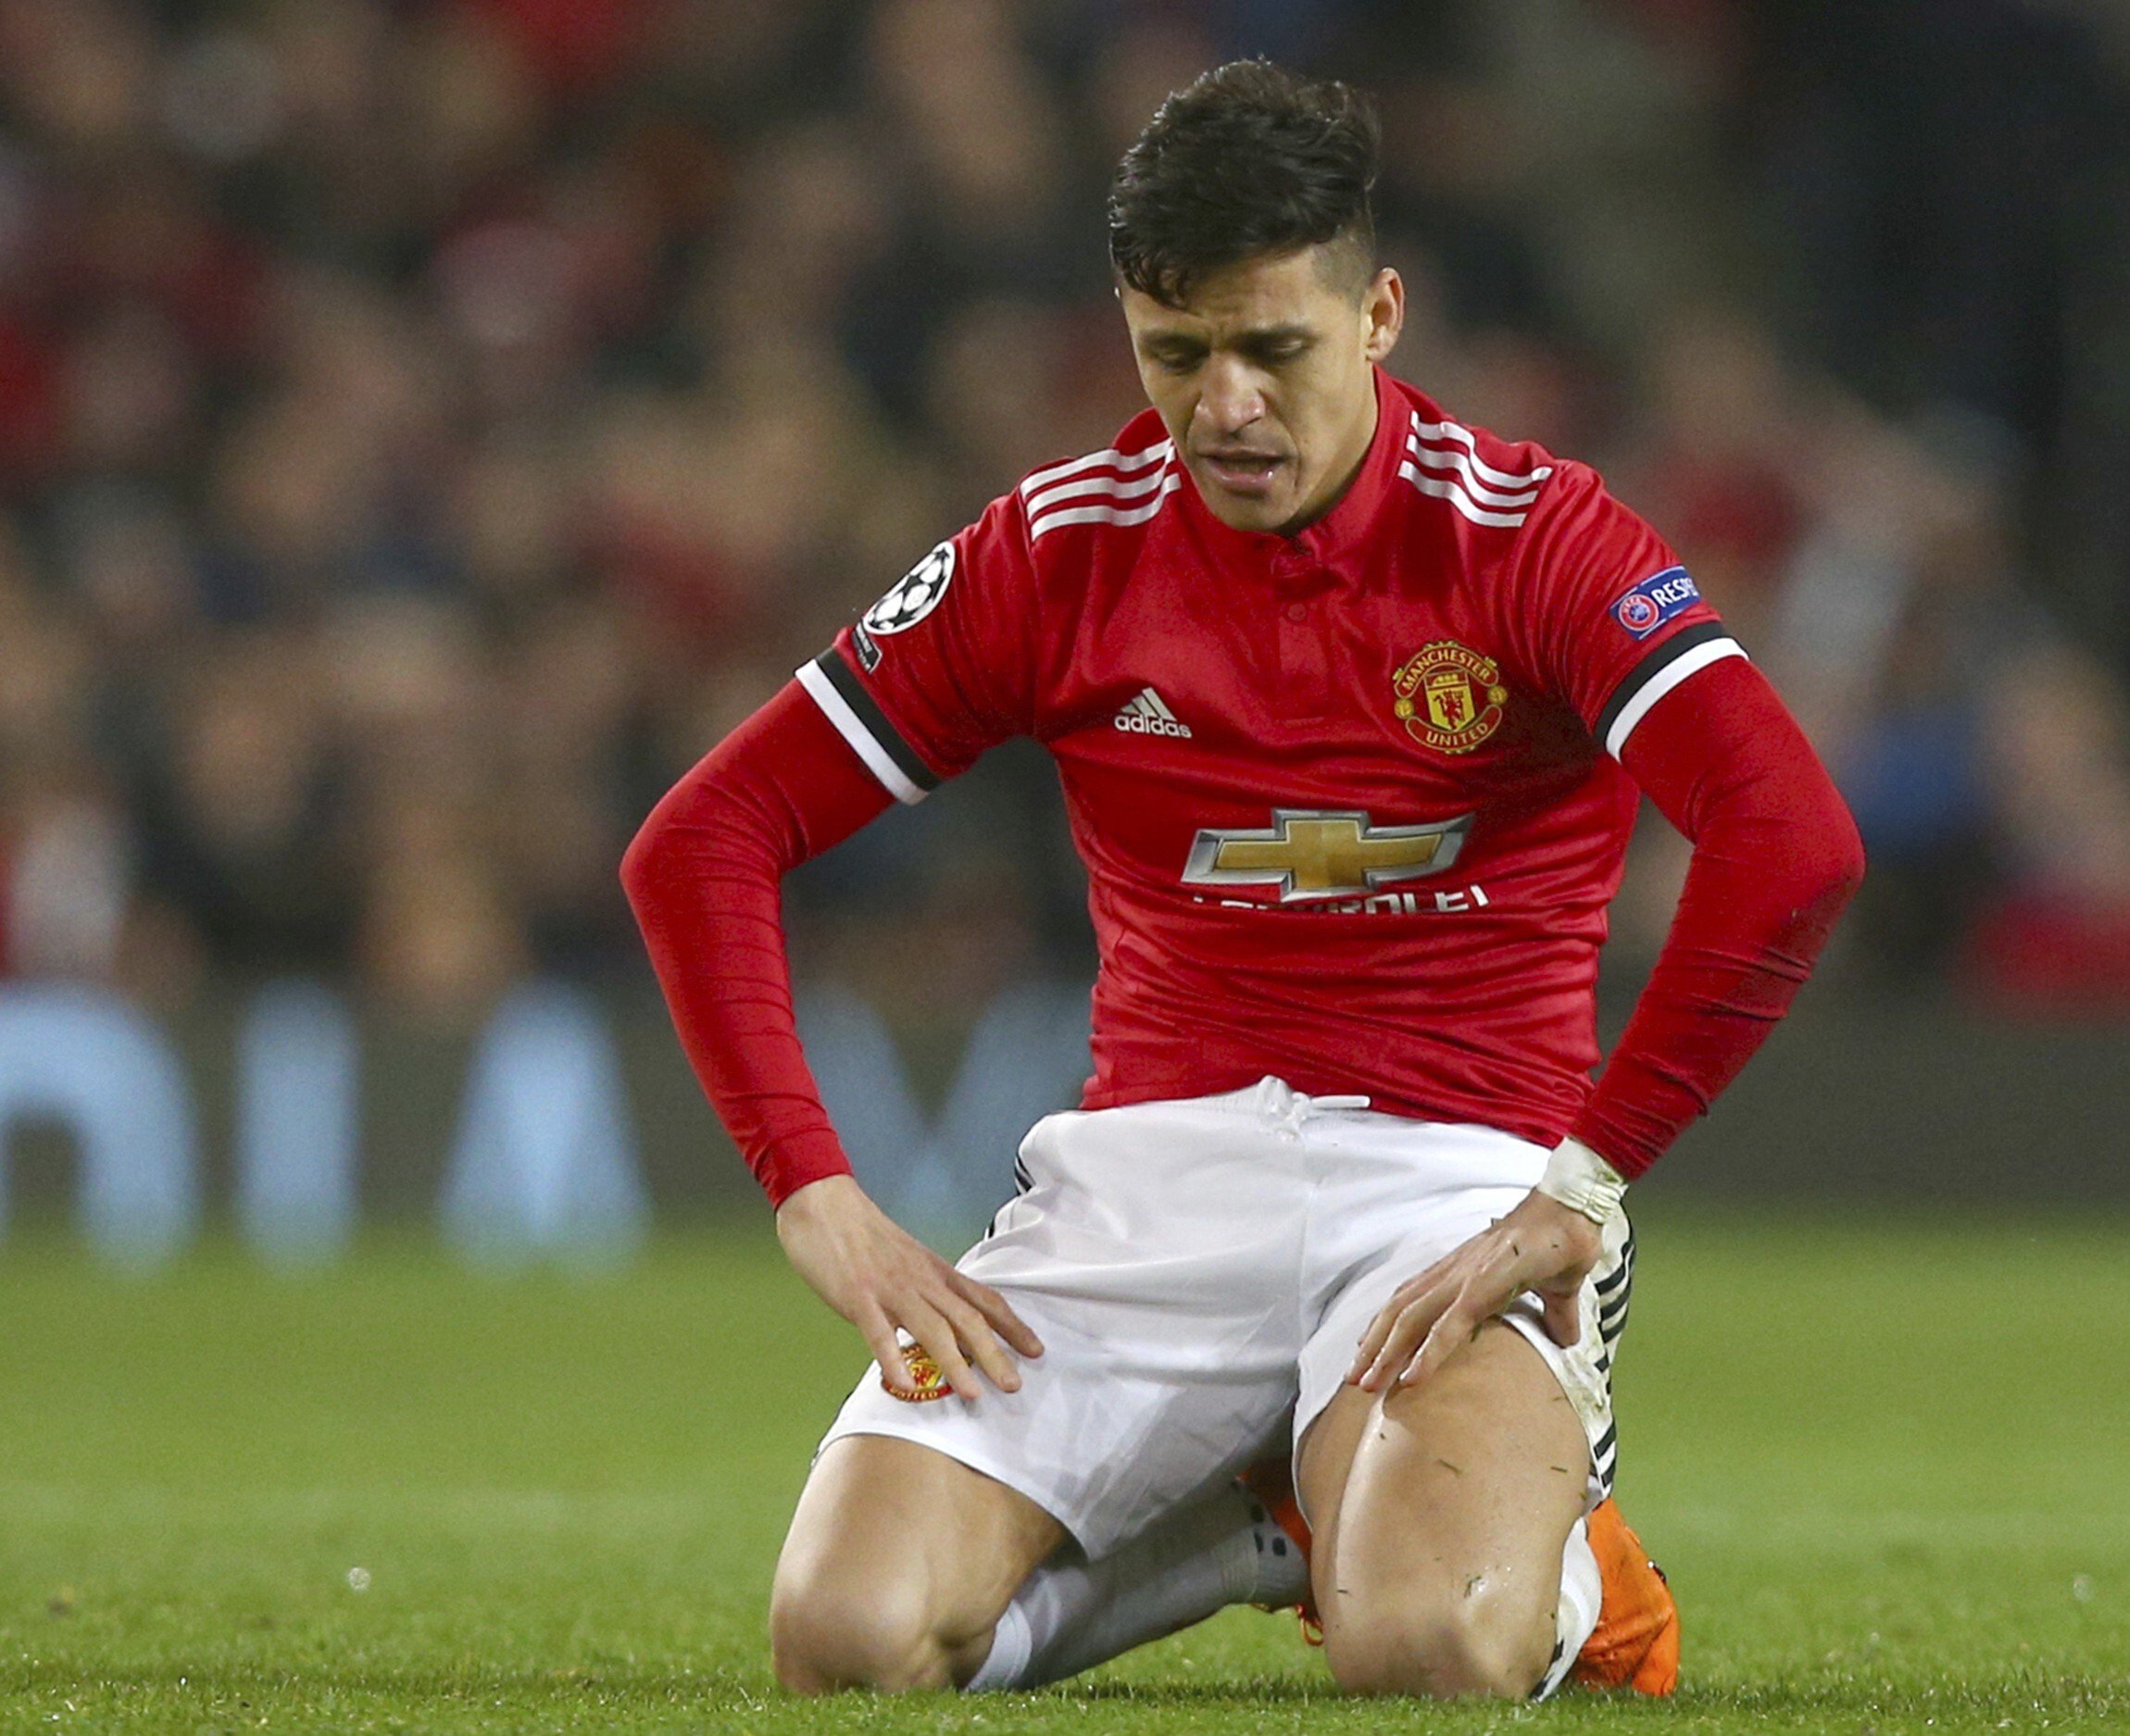 Nobody, including the player, will look back on Alexis Sanchez’s time at Manchester United with any fondness. Photo: AP